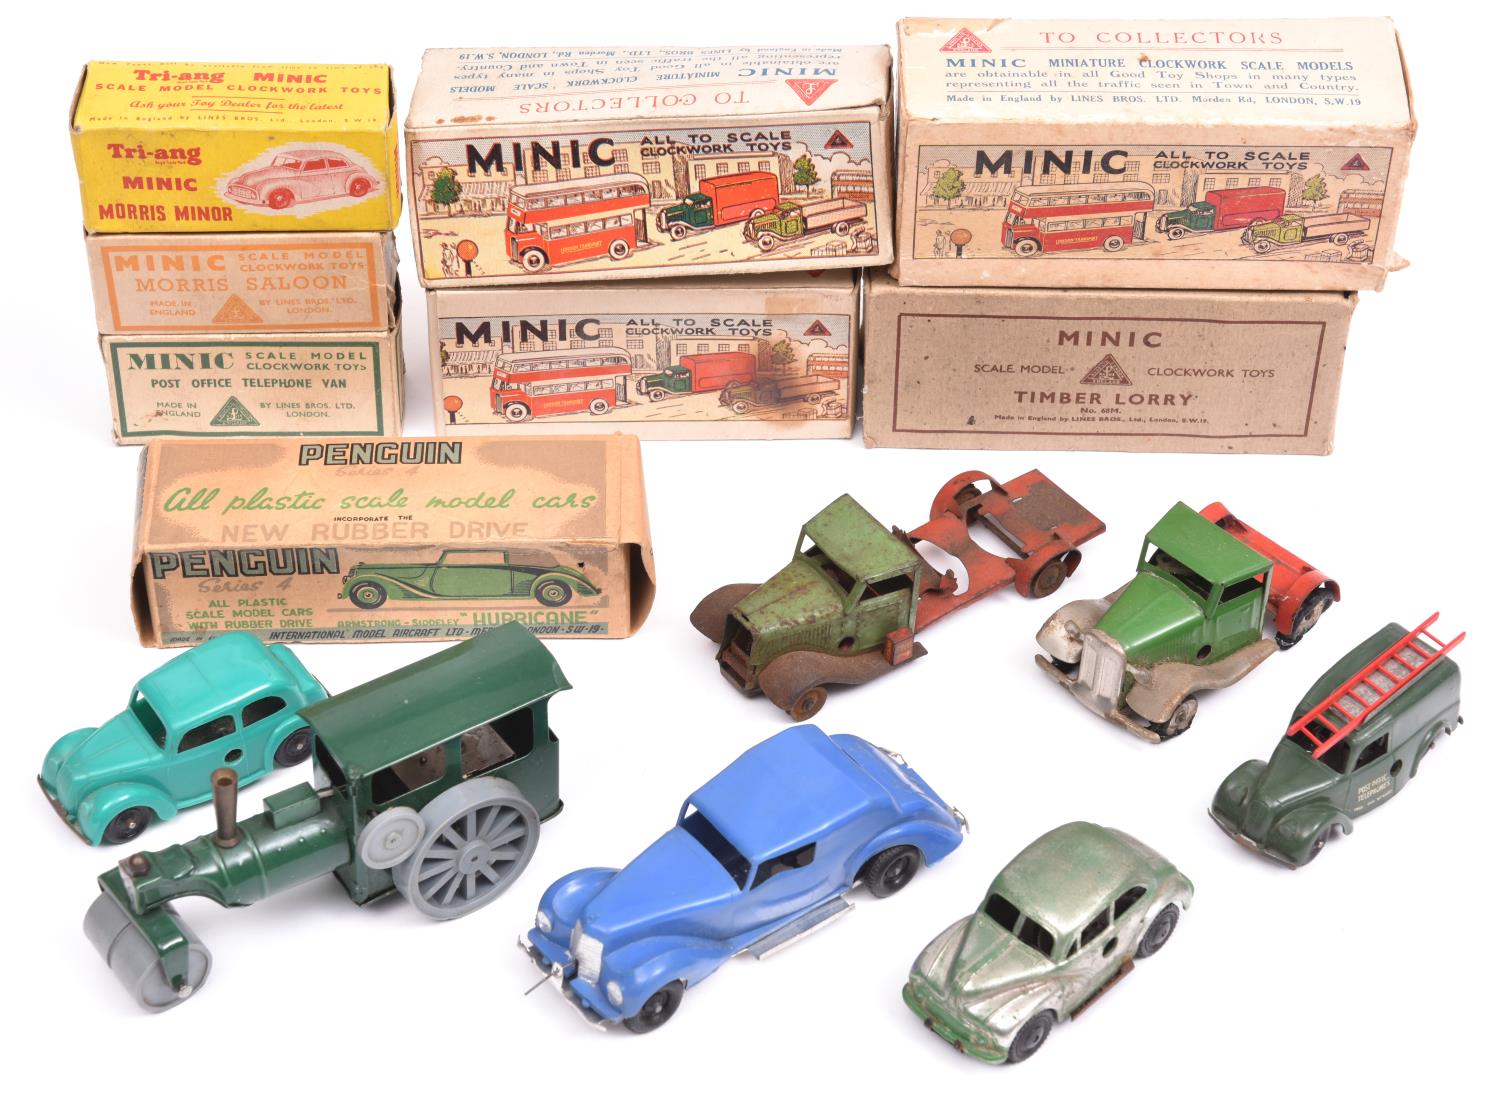 5x Tri-ang Minic and Penguin plastic vehicles. A Morris Saloon (94M) in green. Morris Minor (97M) in